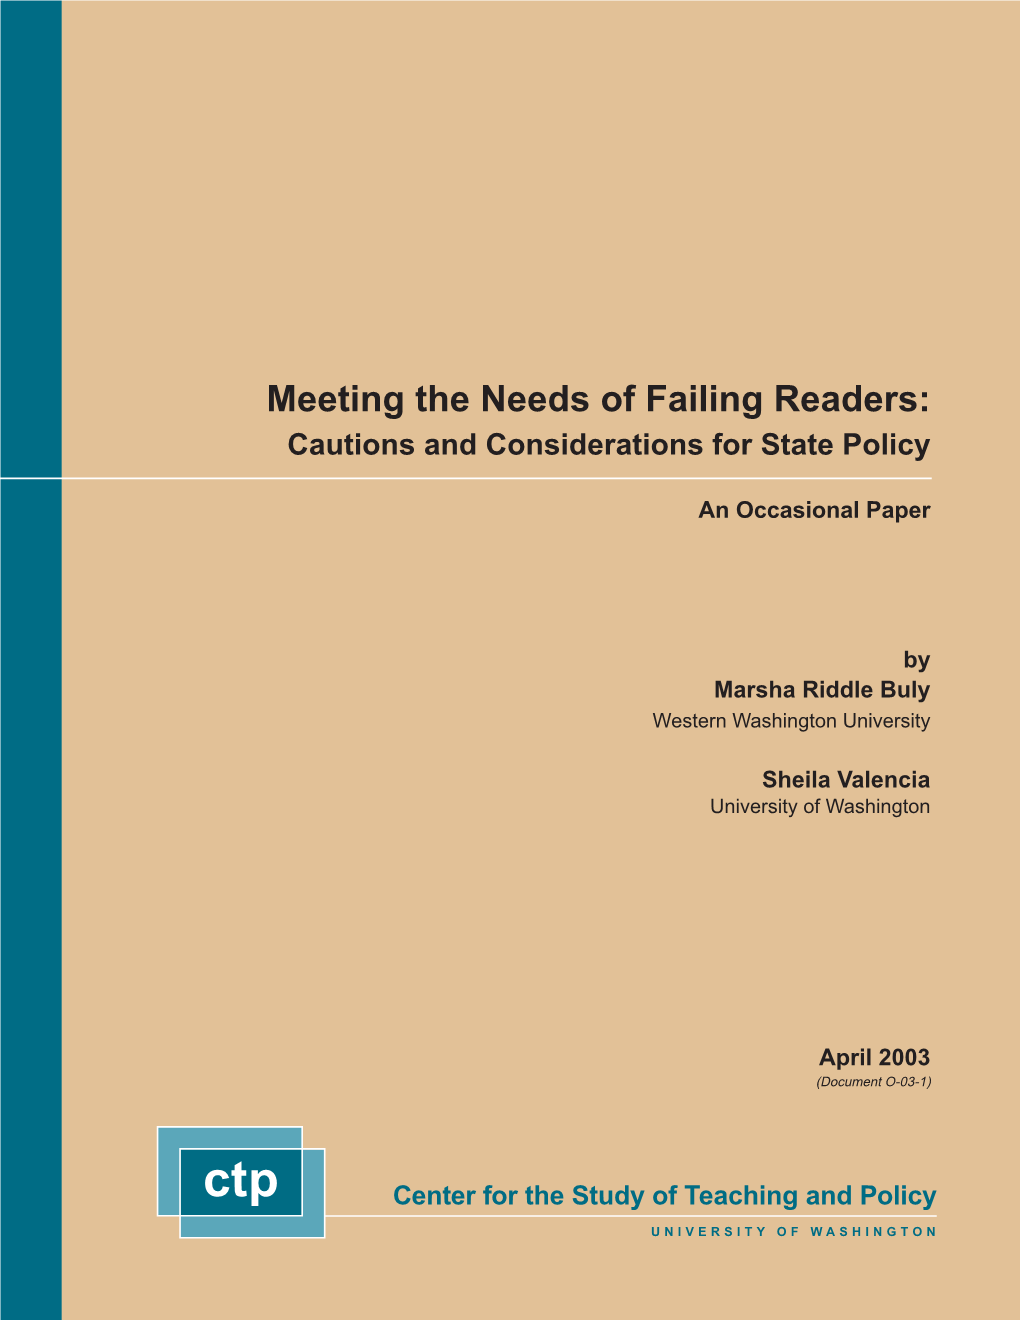 Meeting the Needs of Failing Readers: Cautions and Considerations for State Policy